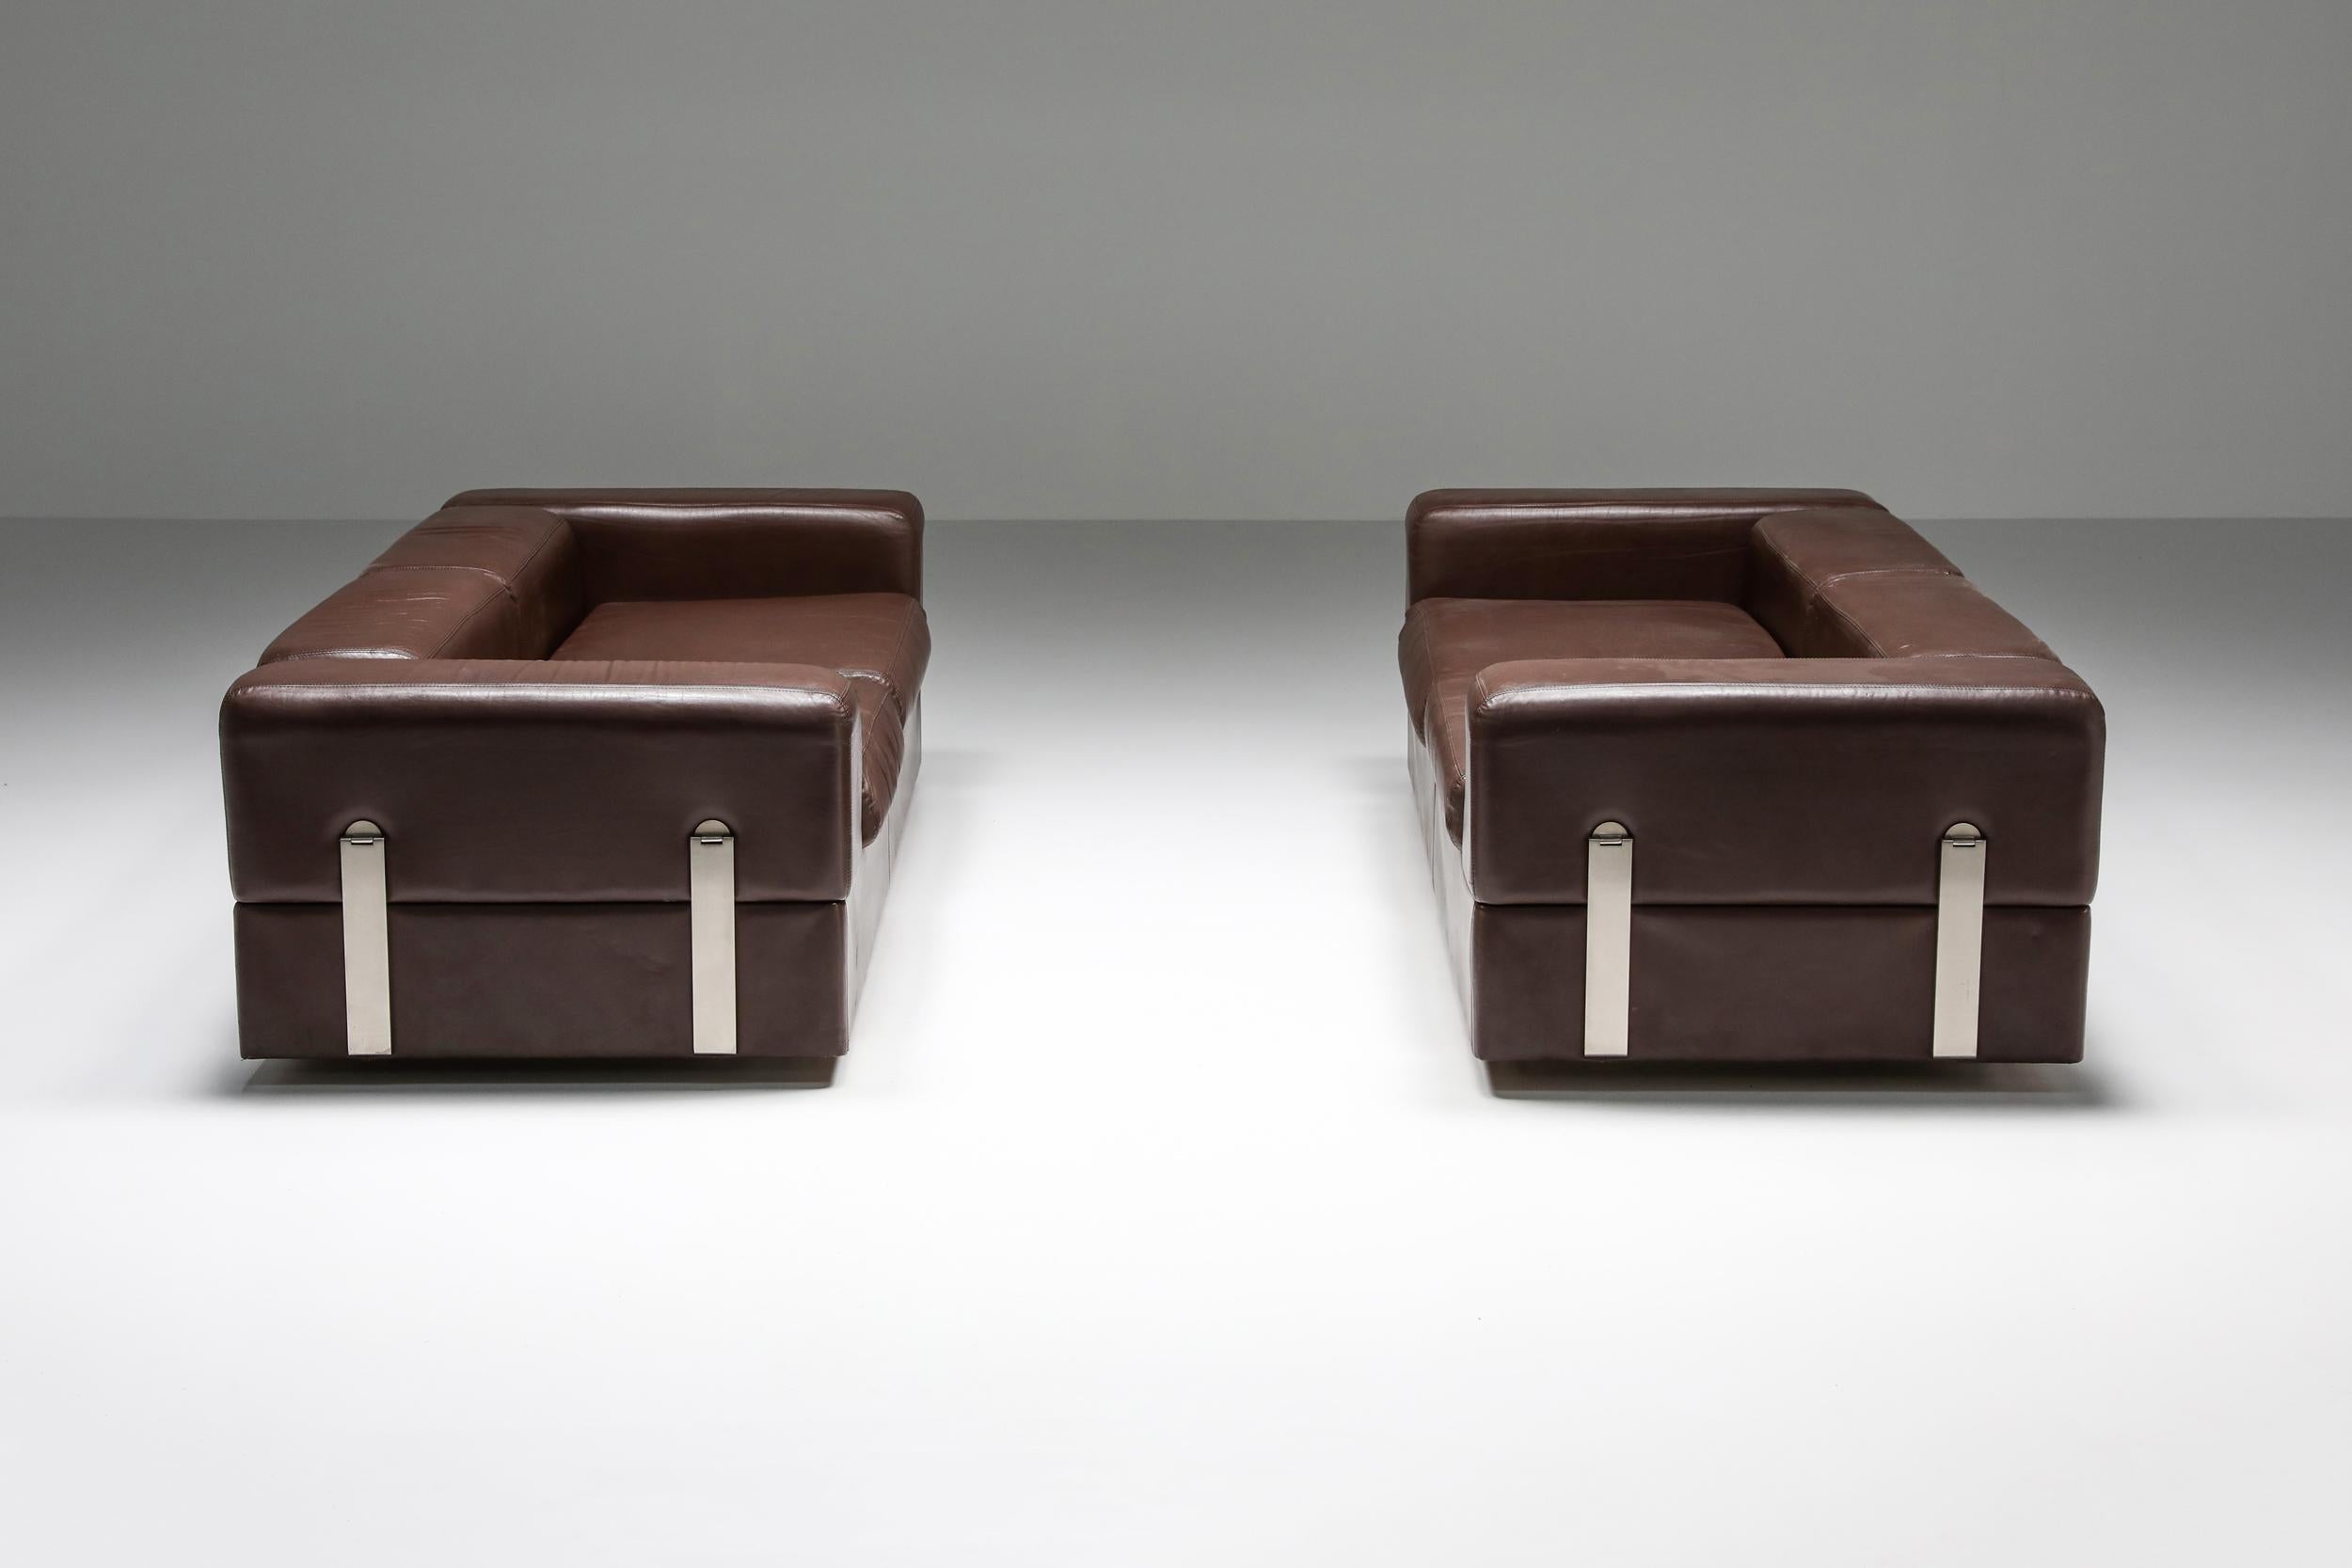 Italian Post-Modern Daybed Sofa 711 by Tito Agnoli for Cinova in Brown Leather, 1960 For Sale